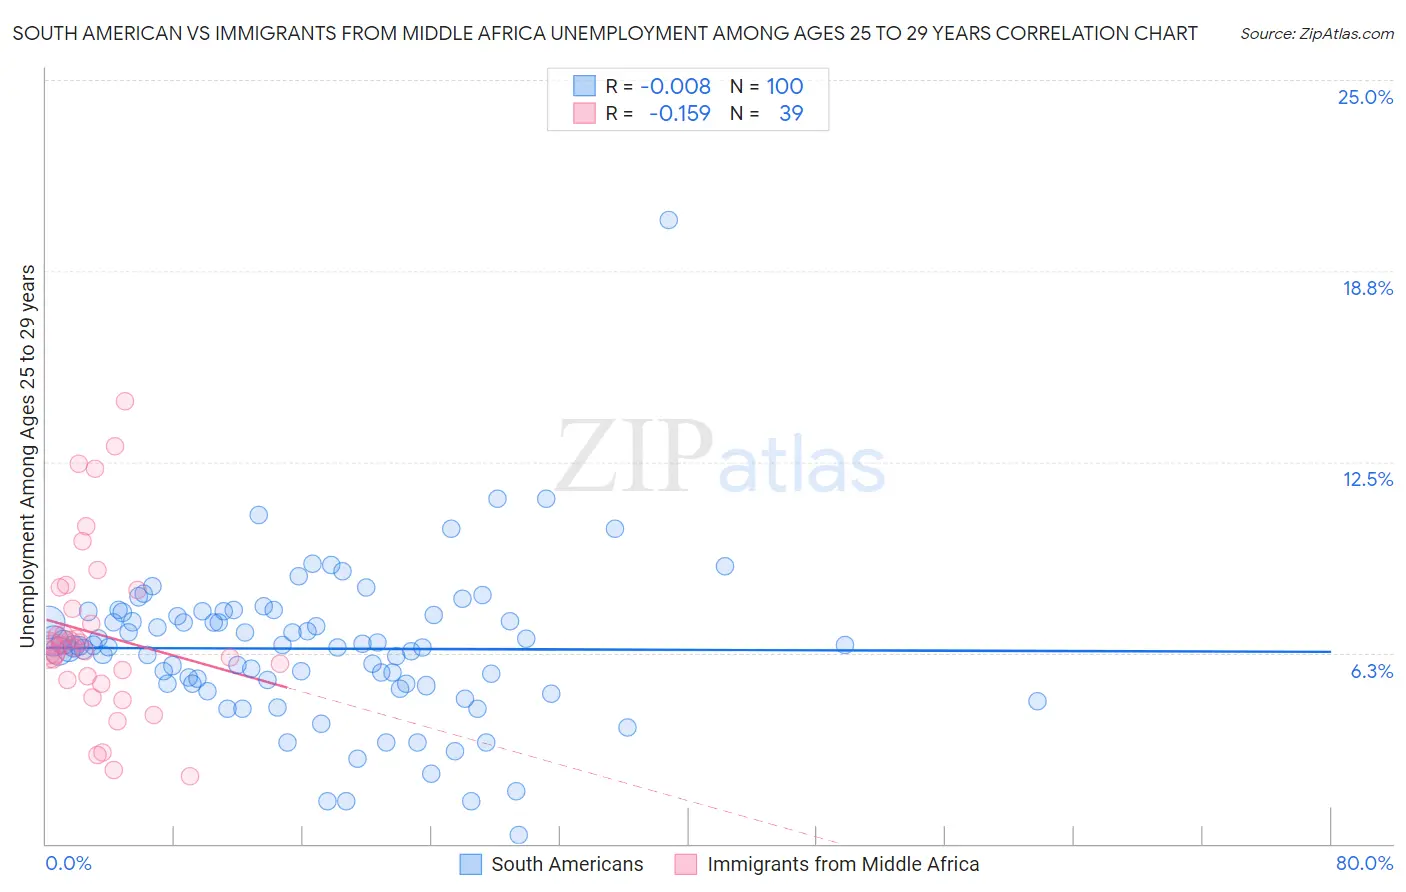 South American vs Immigrants from Middle Africa Unemployment Among Ages 25 to 29 years